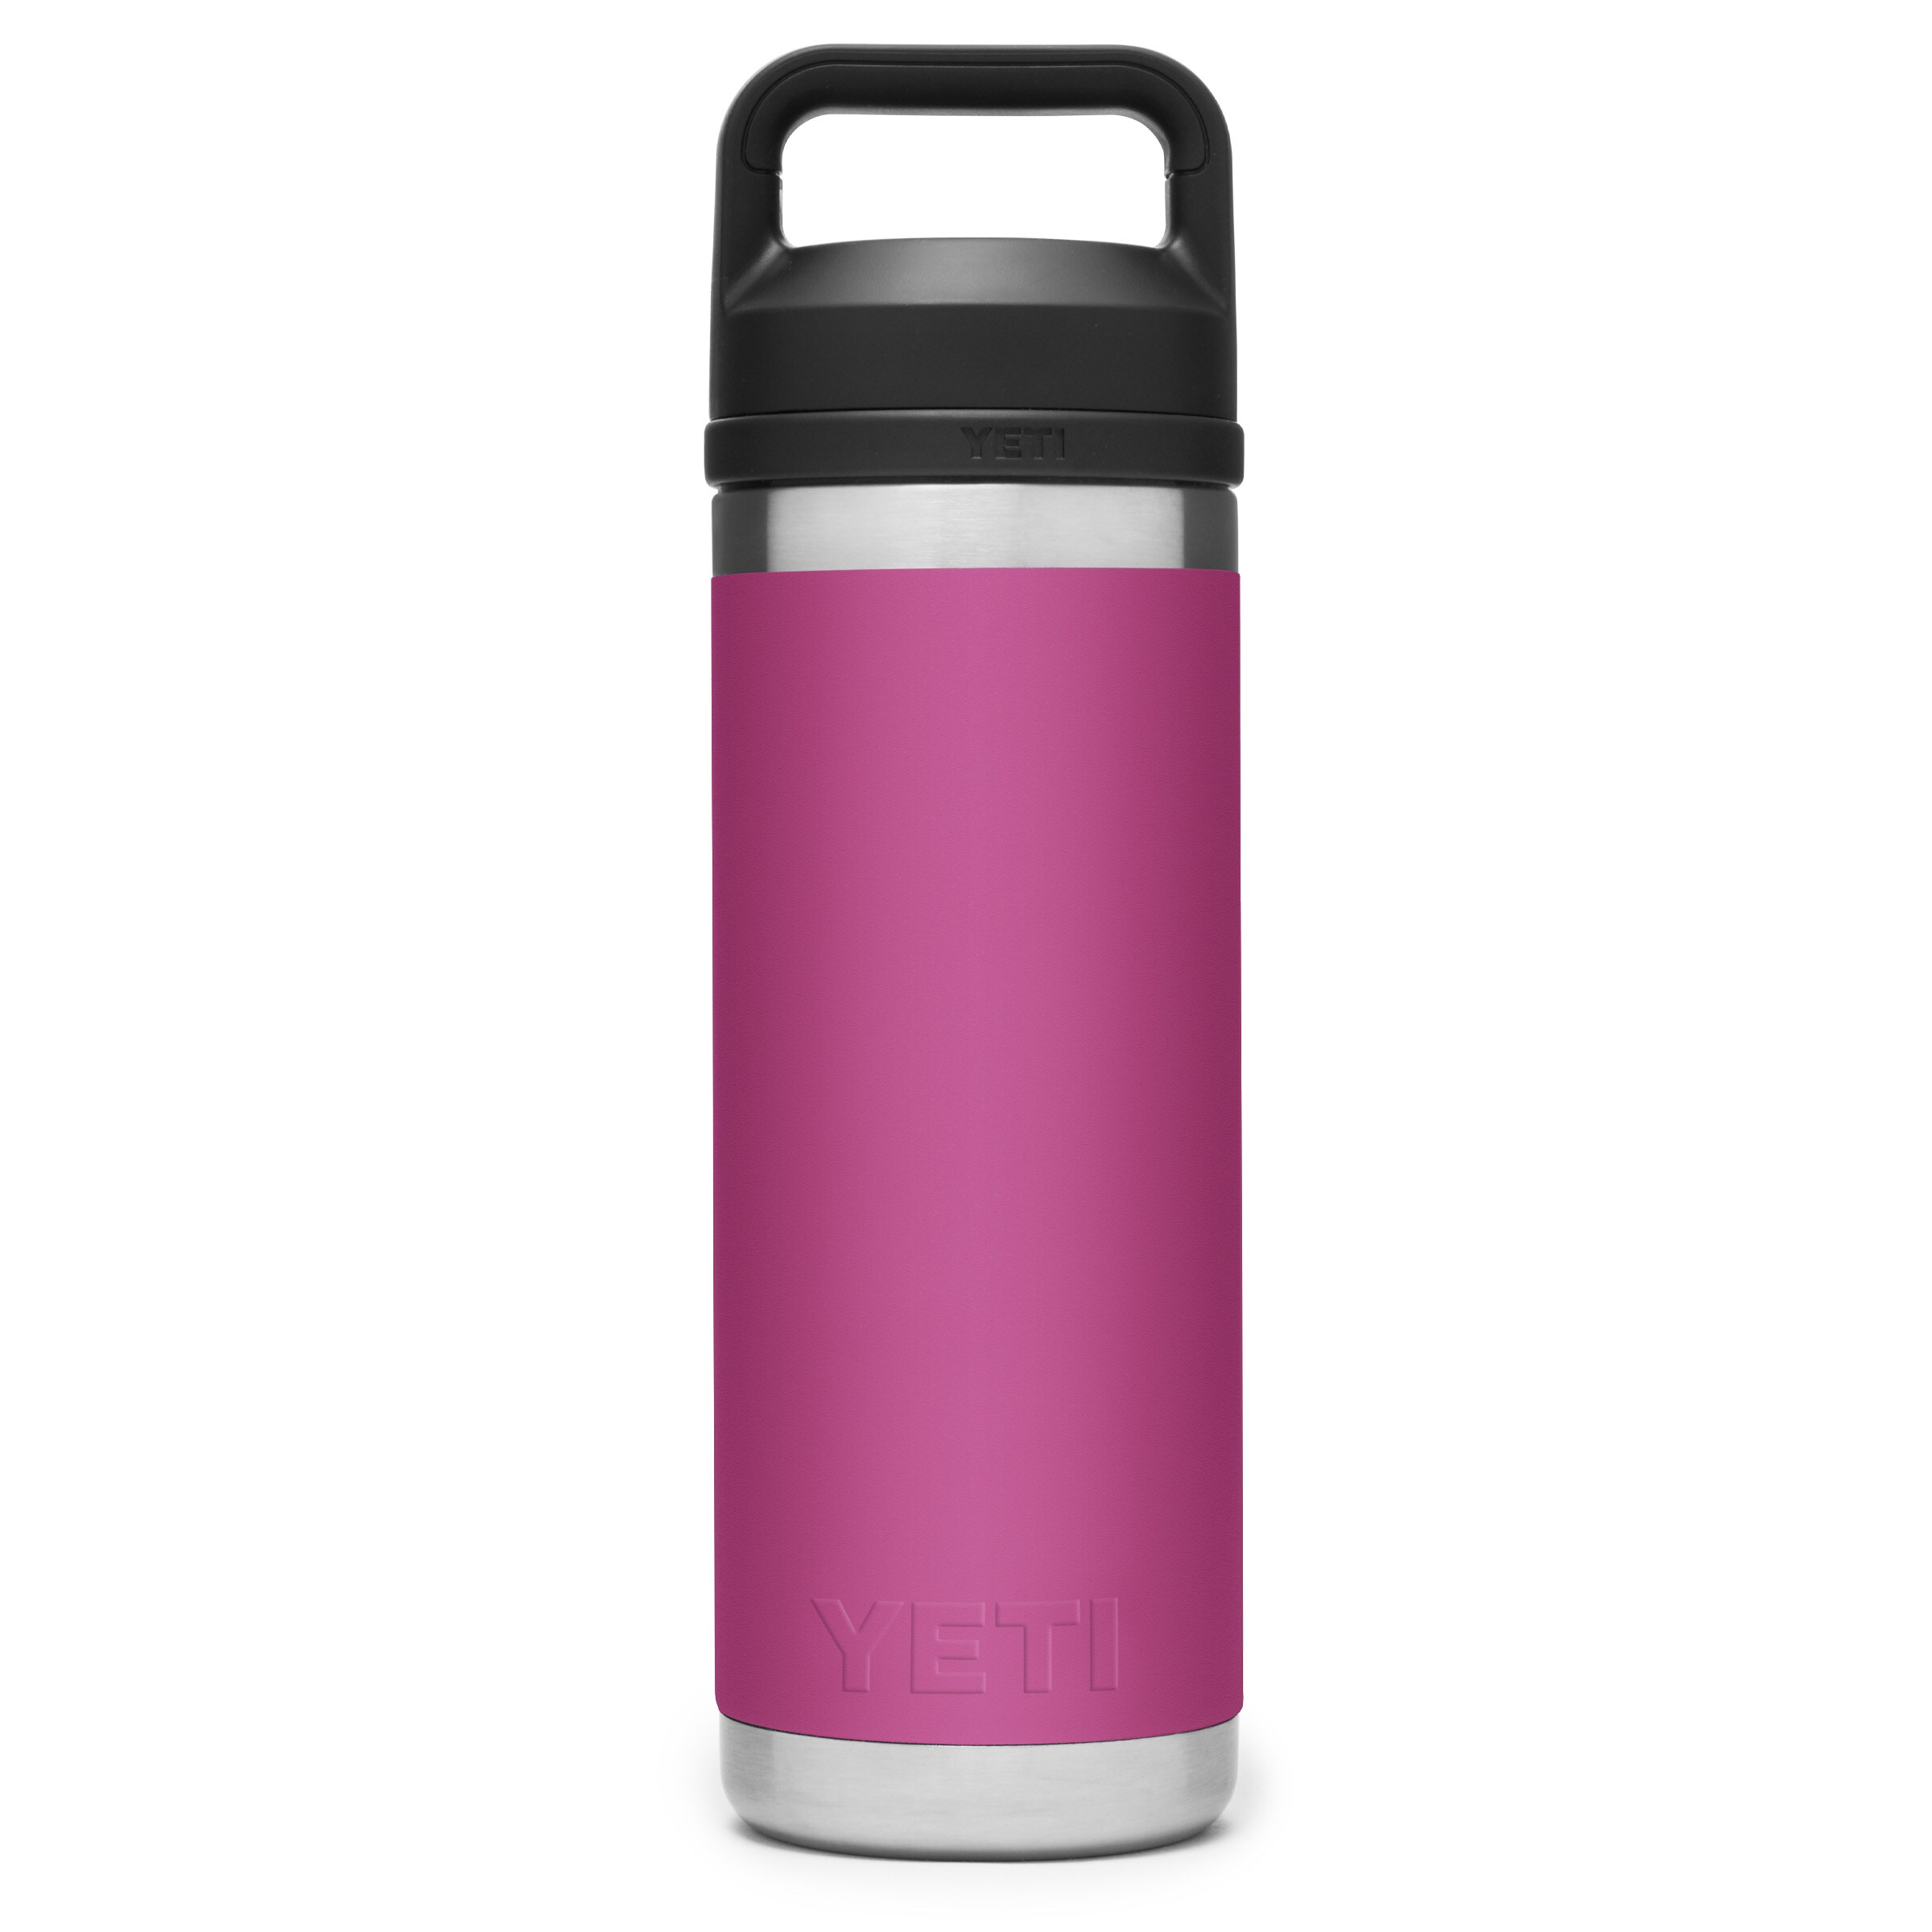 Details about   YETI RAMBLER BOTTLE 18 OZ PINK LIMITED EDITION RARE 